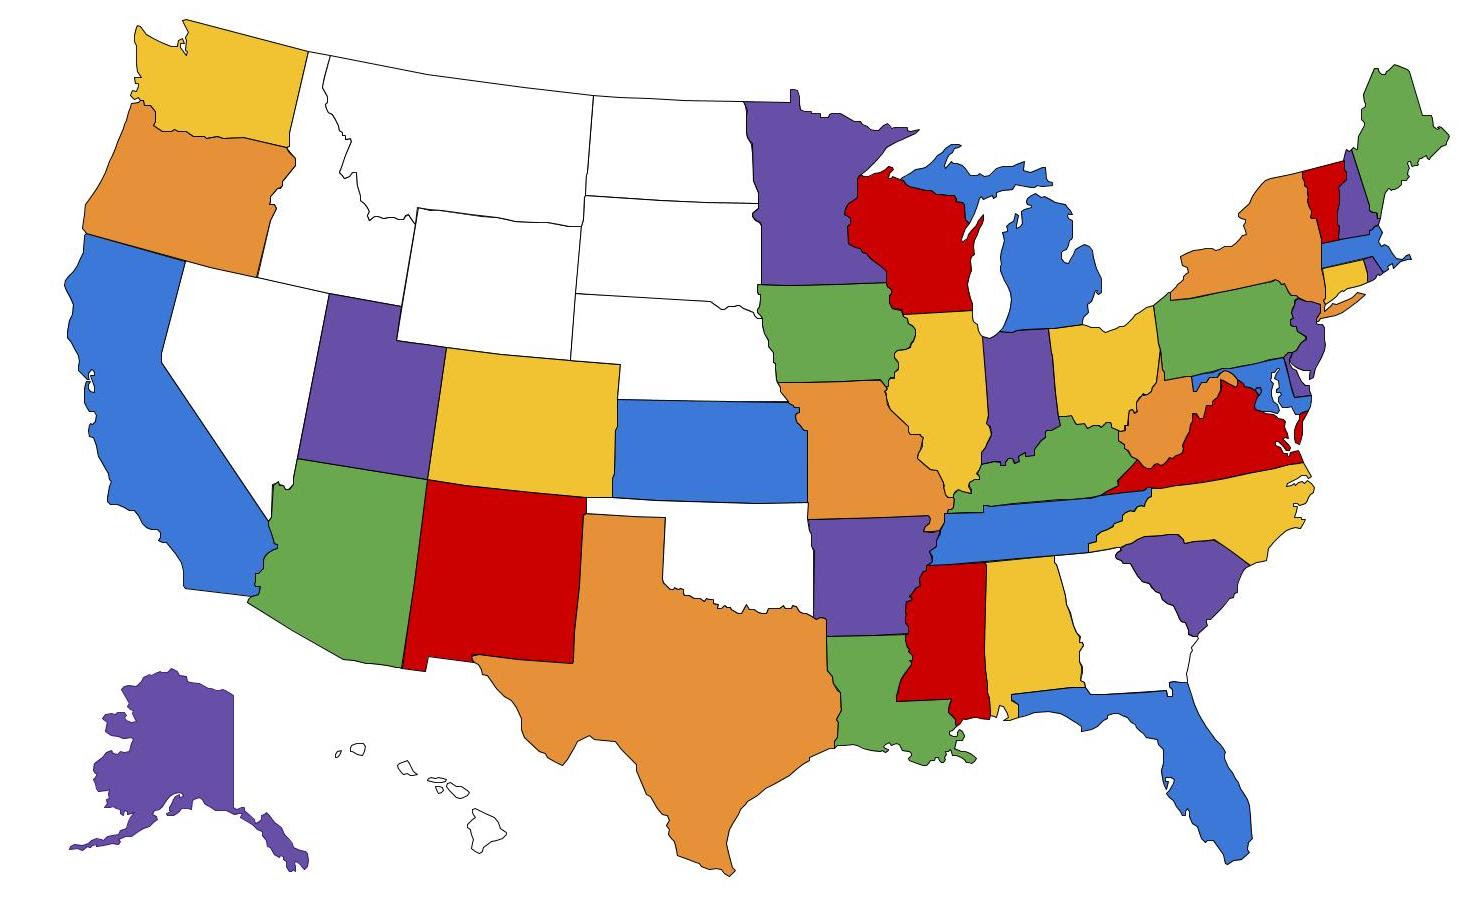 States that participated in the 40 Days of Moral Action in 2018